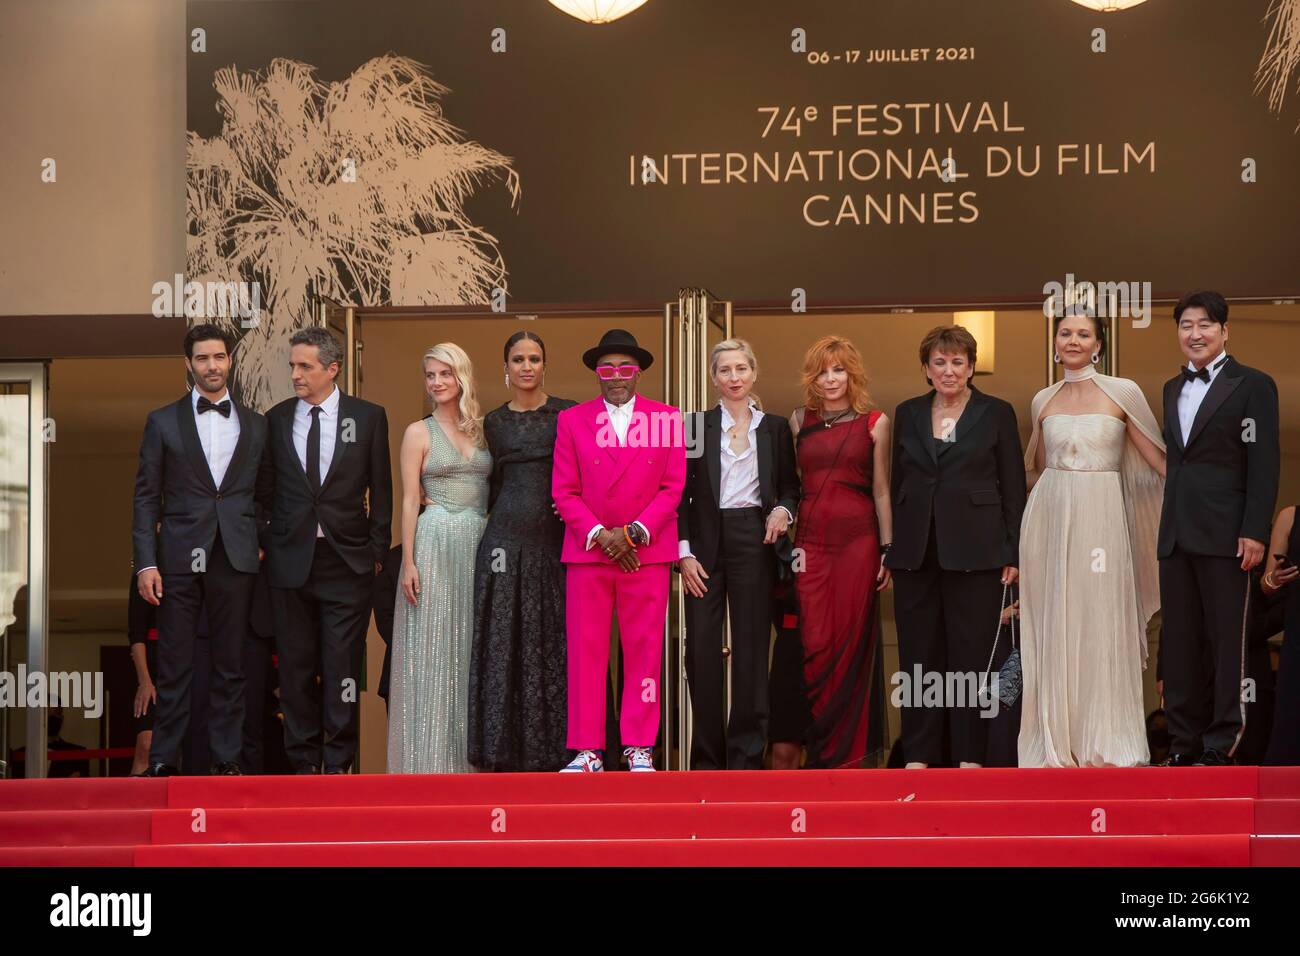 Cannes, France. 06th July, 2021. Jury members Tahar Rahim, Kleber Mendonca Filho, Melanie Laurent, Mati Diop, jury president Spike Lee, Jessica Hausner and Mylene Farmer, french culture minister Roselyne Bachelot and jury member Maggie Gyllenhaal and Song Kang-ho attend the 'Annette' screening and opening ceremony during the 74th annual Cannes Film Festival on July 06, 2021 in Cannes, France. Photo: Franck Boham/imageSPACE. Credit: Imagespace/Alamy Live News Stock Photo